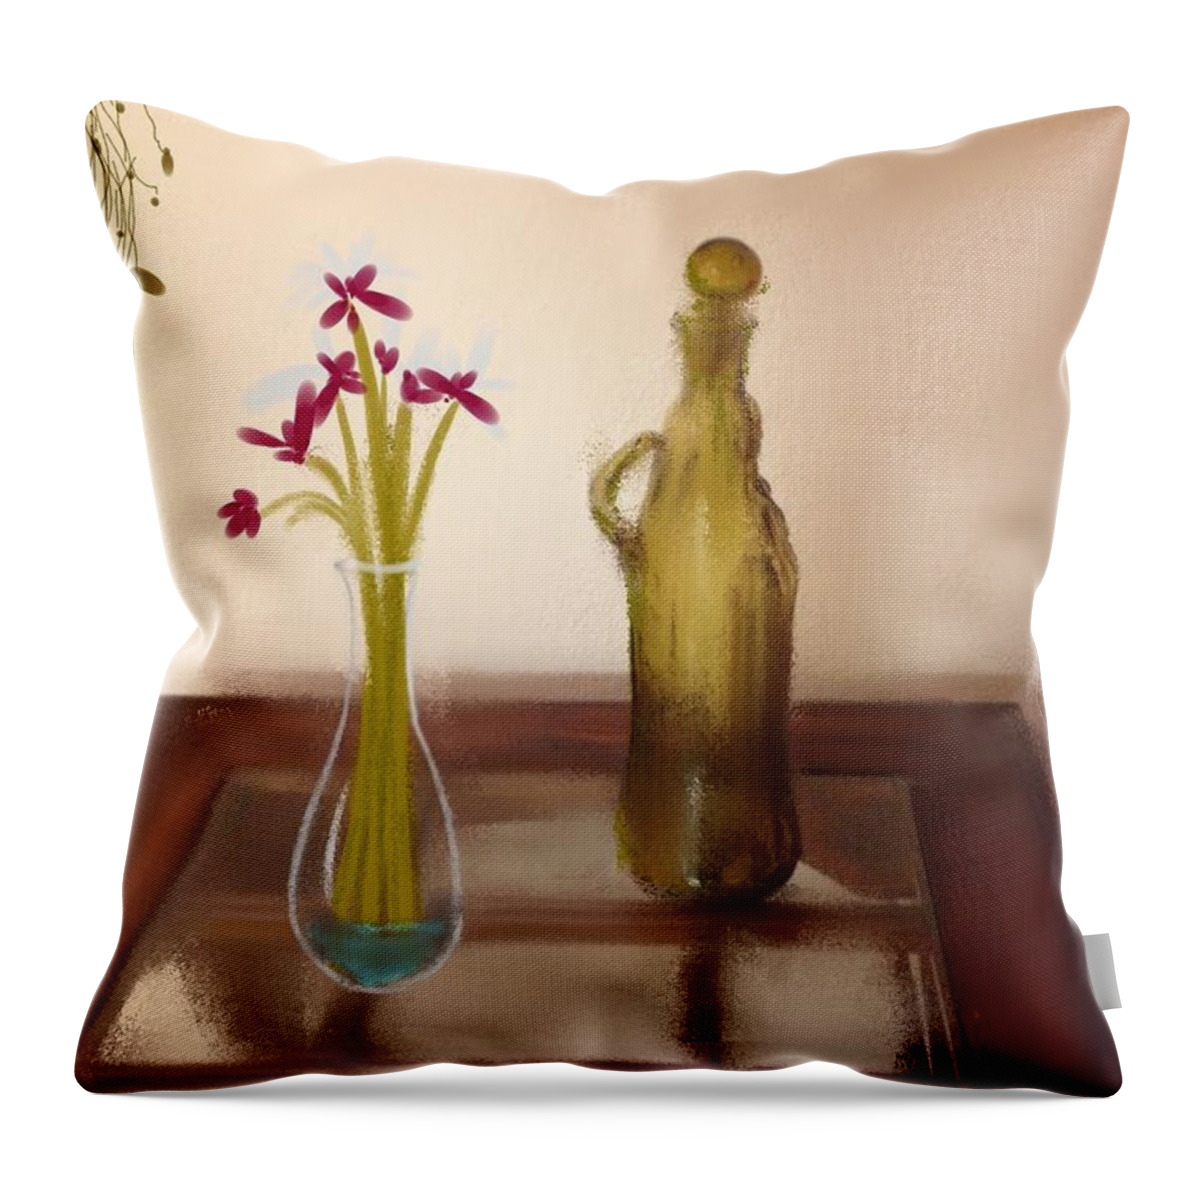 Flowers Throw Pillow featuring the digital art Still Life with Flowers by Dan Twyman